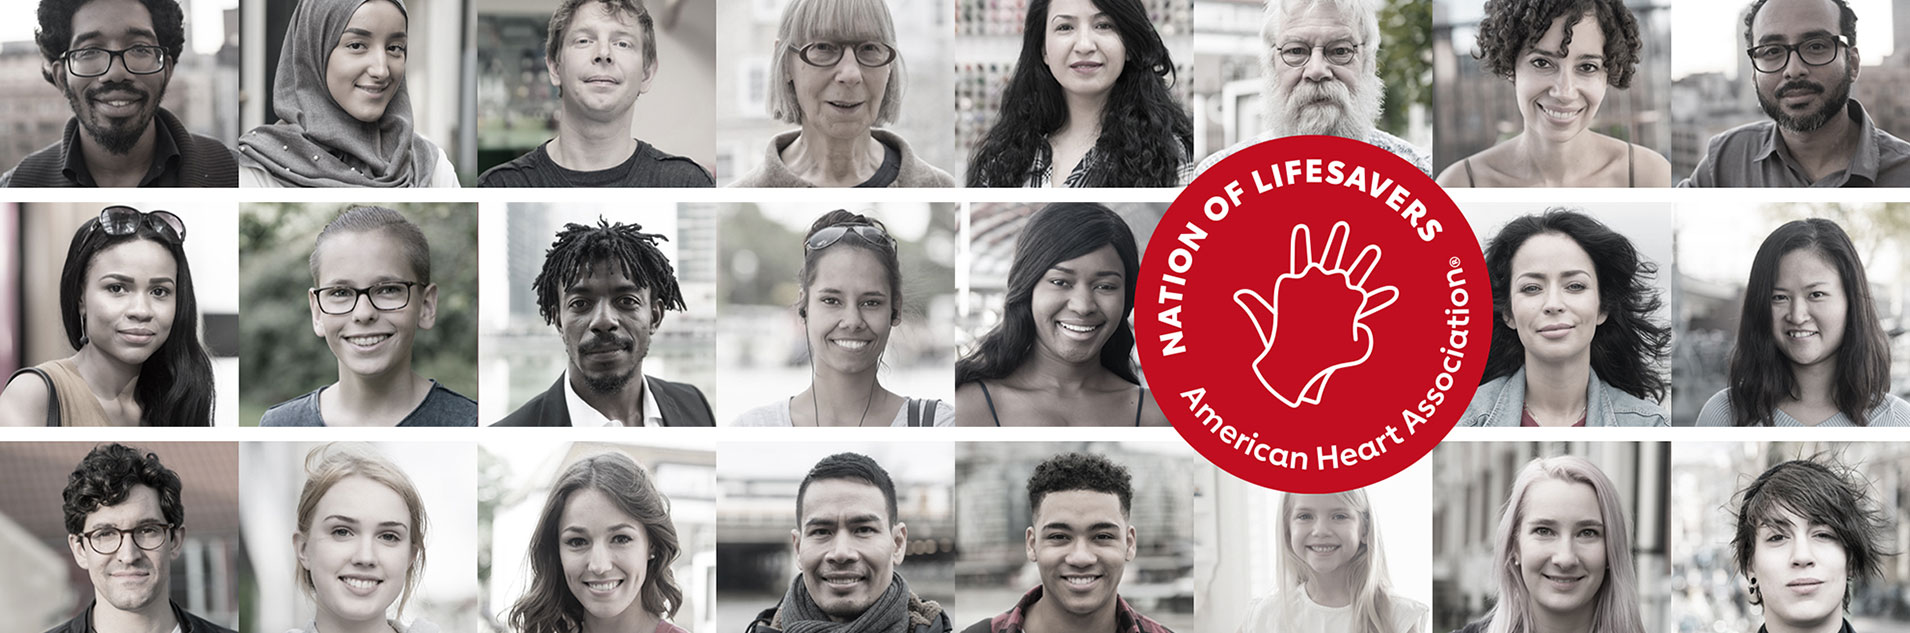 hero banner image with individual photos of twenty four diverse people Nation of Lifesavers